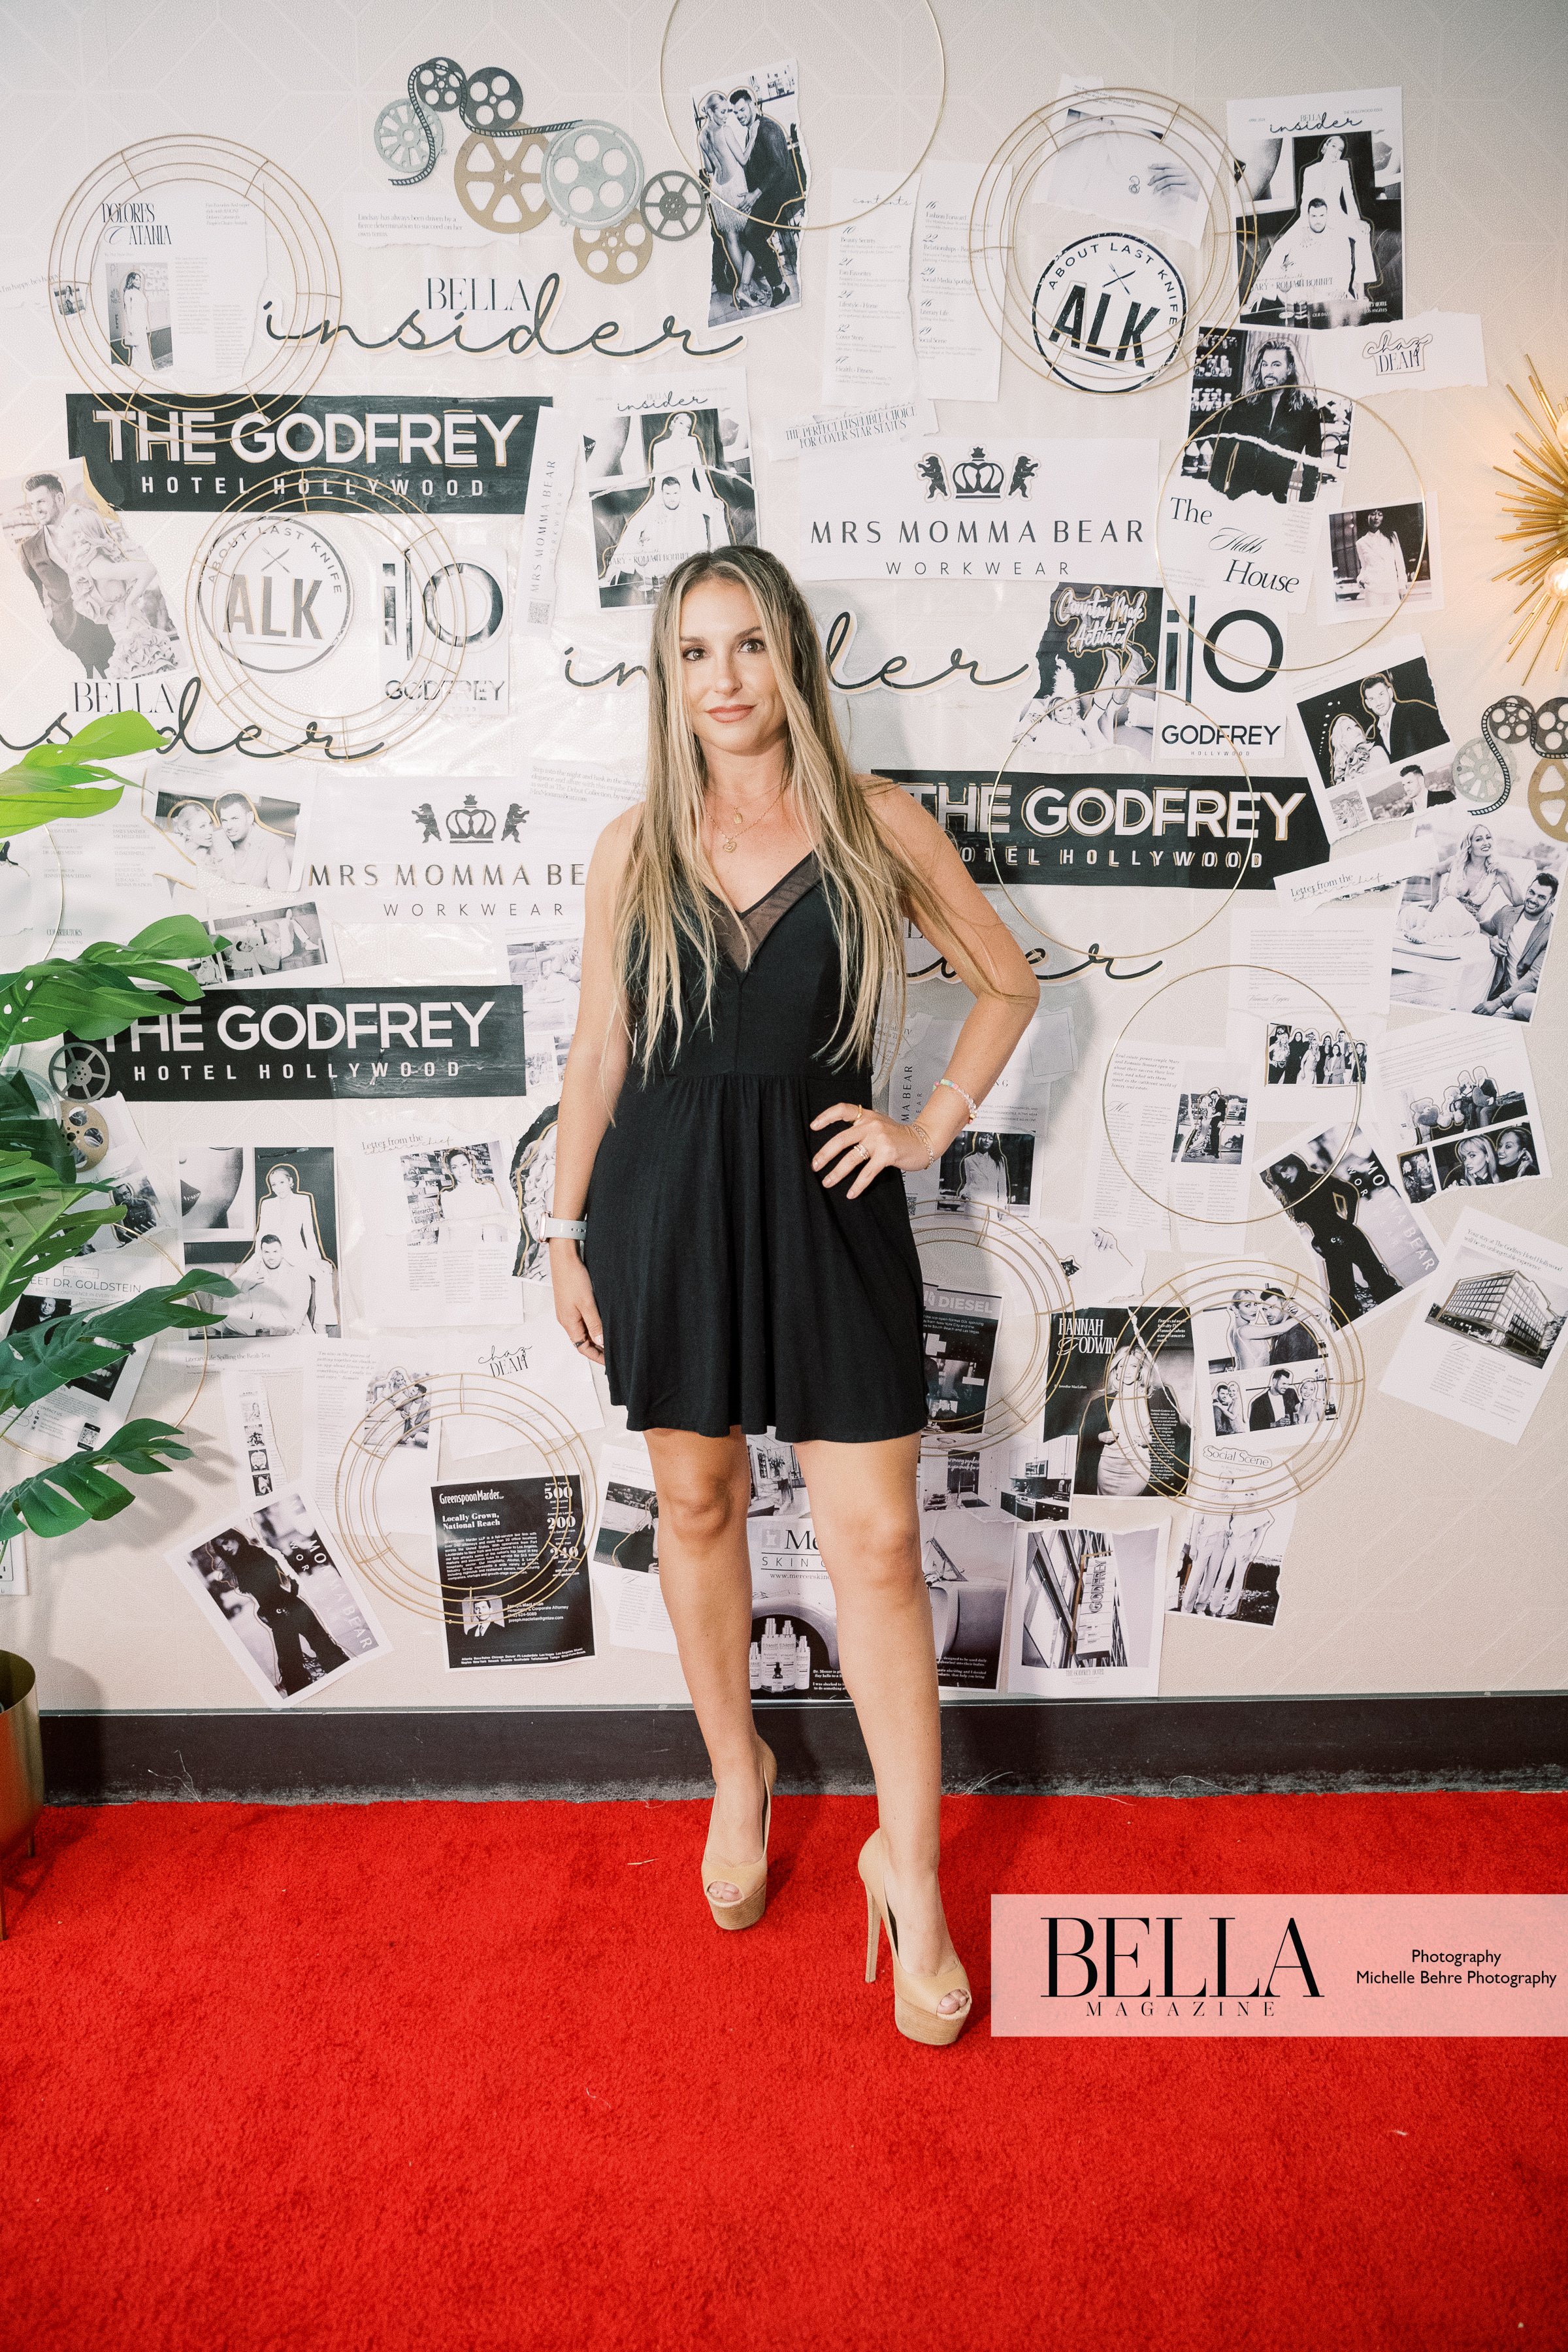 Michelle-Behre-Photography-BELLA-Magazine-Hollywood-Cover-Party-21.jpg